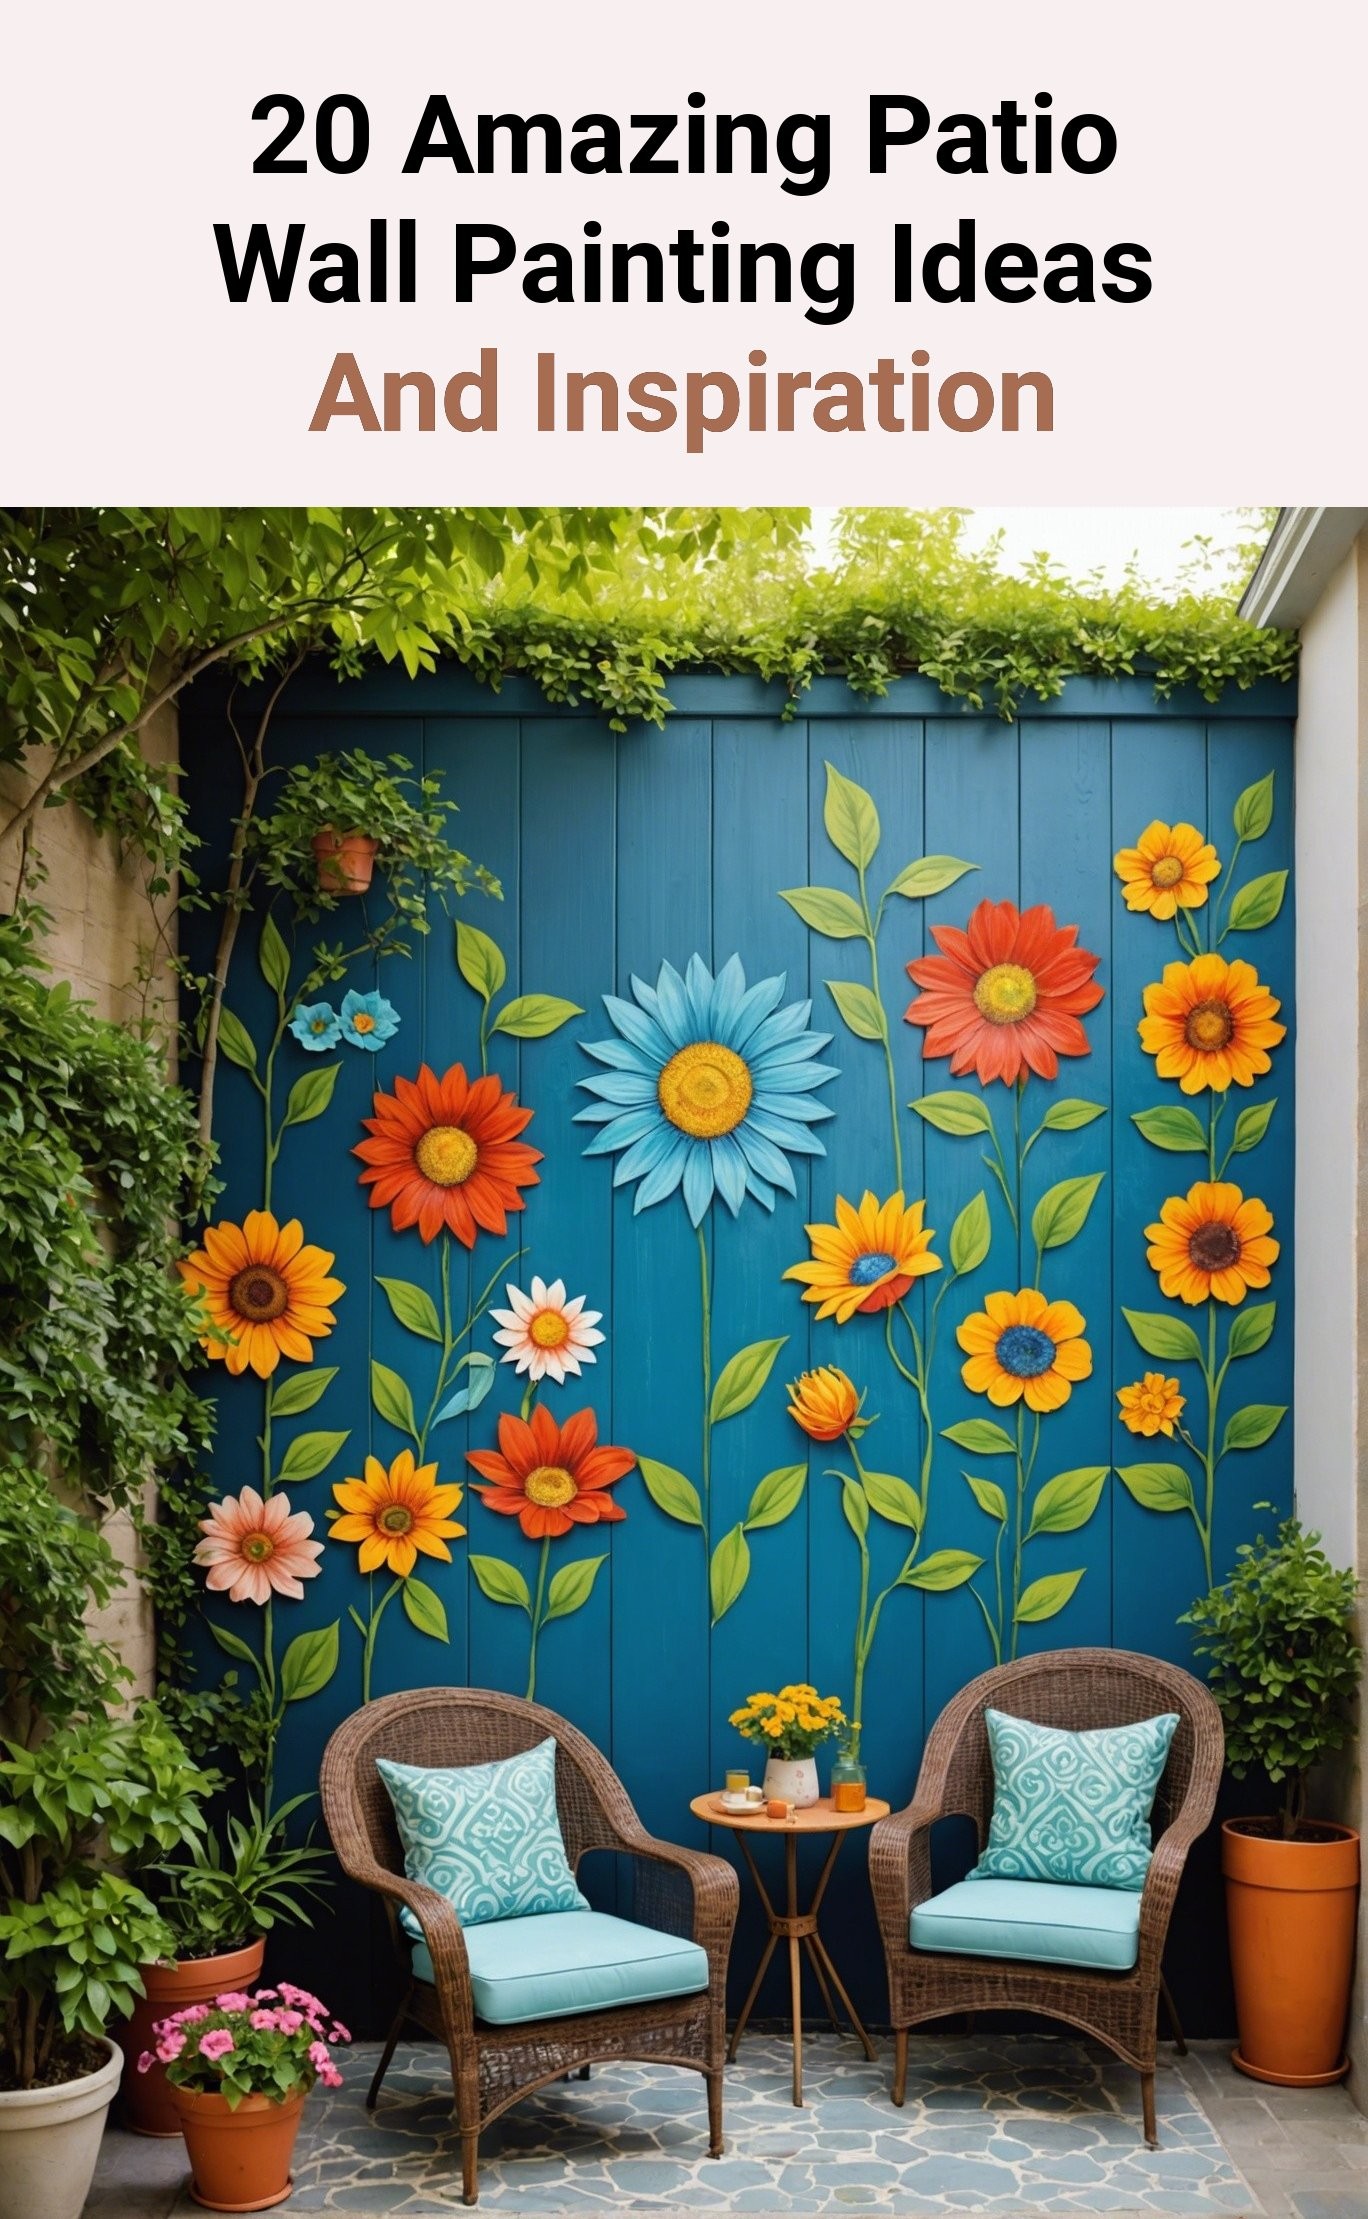 20 Amazing Patio Wall Painting Ideas And Inspiration